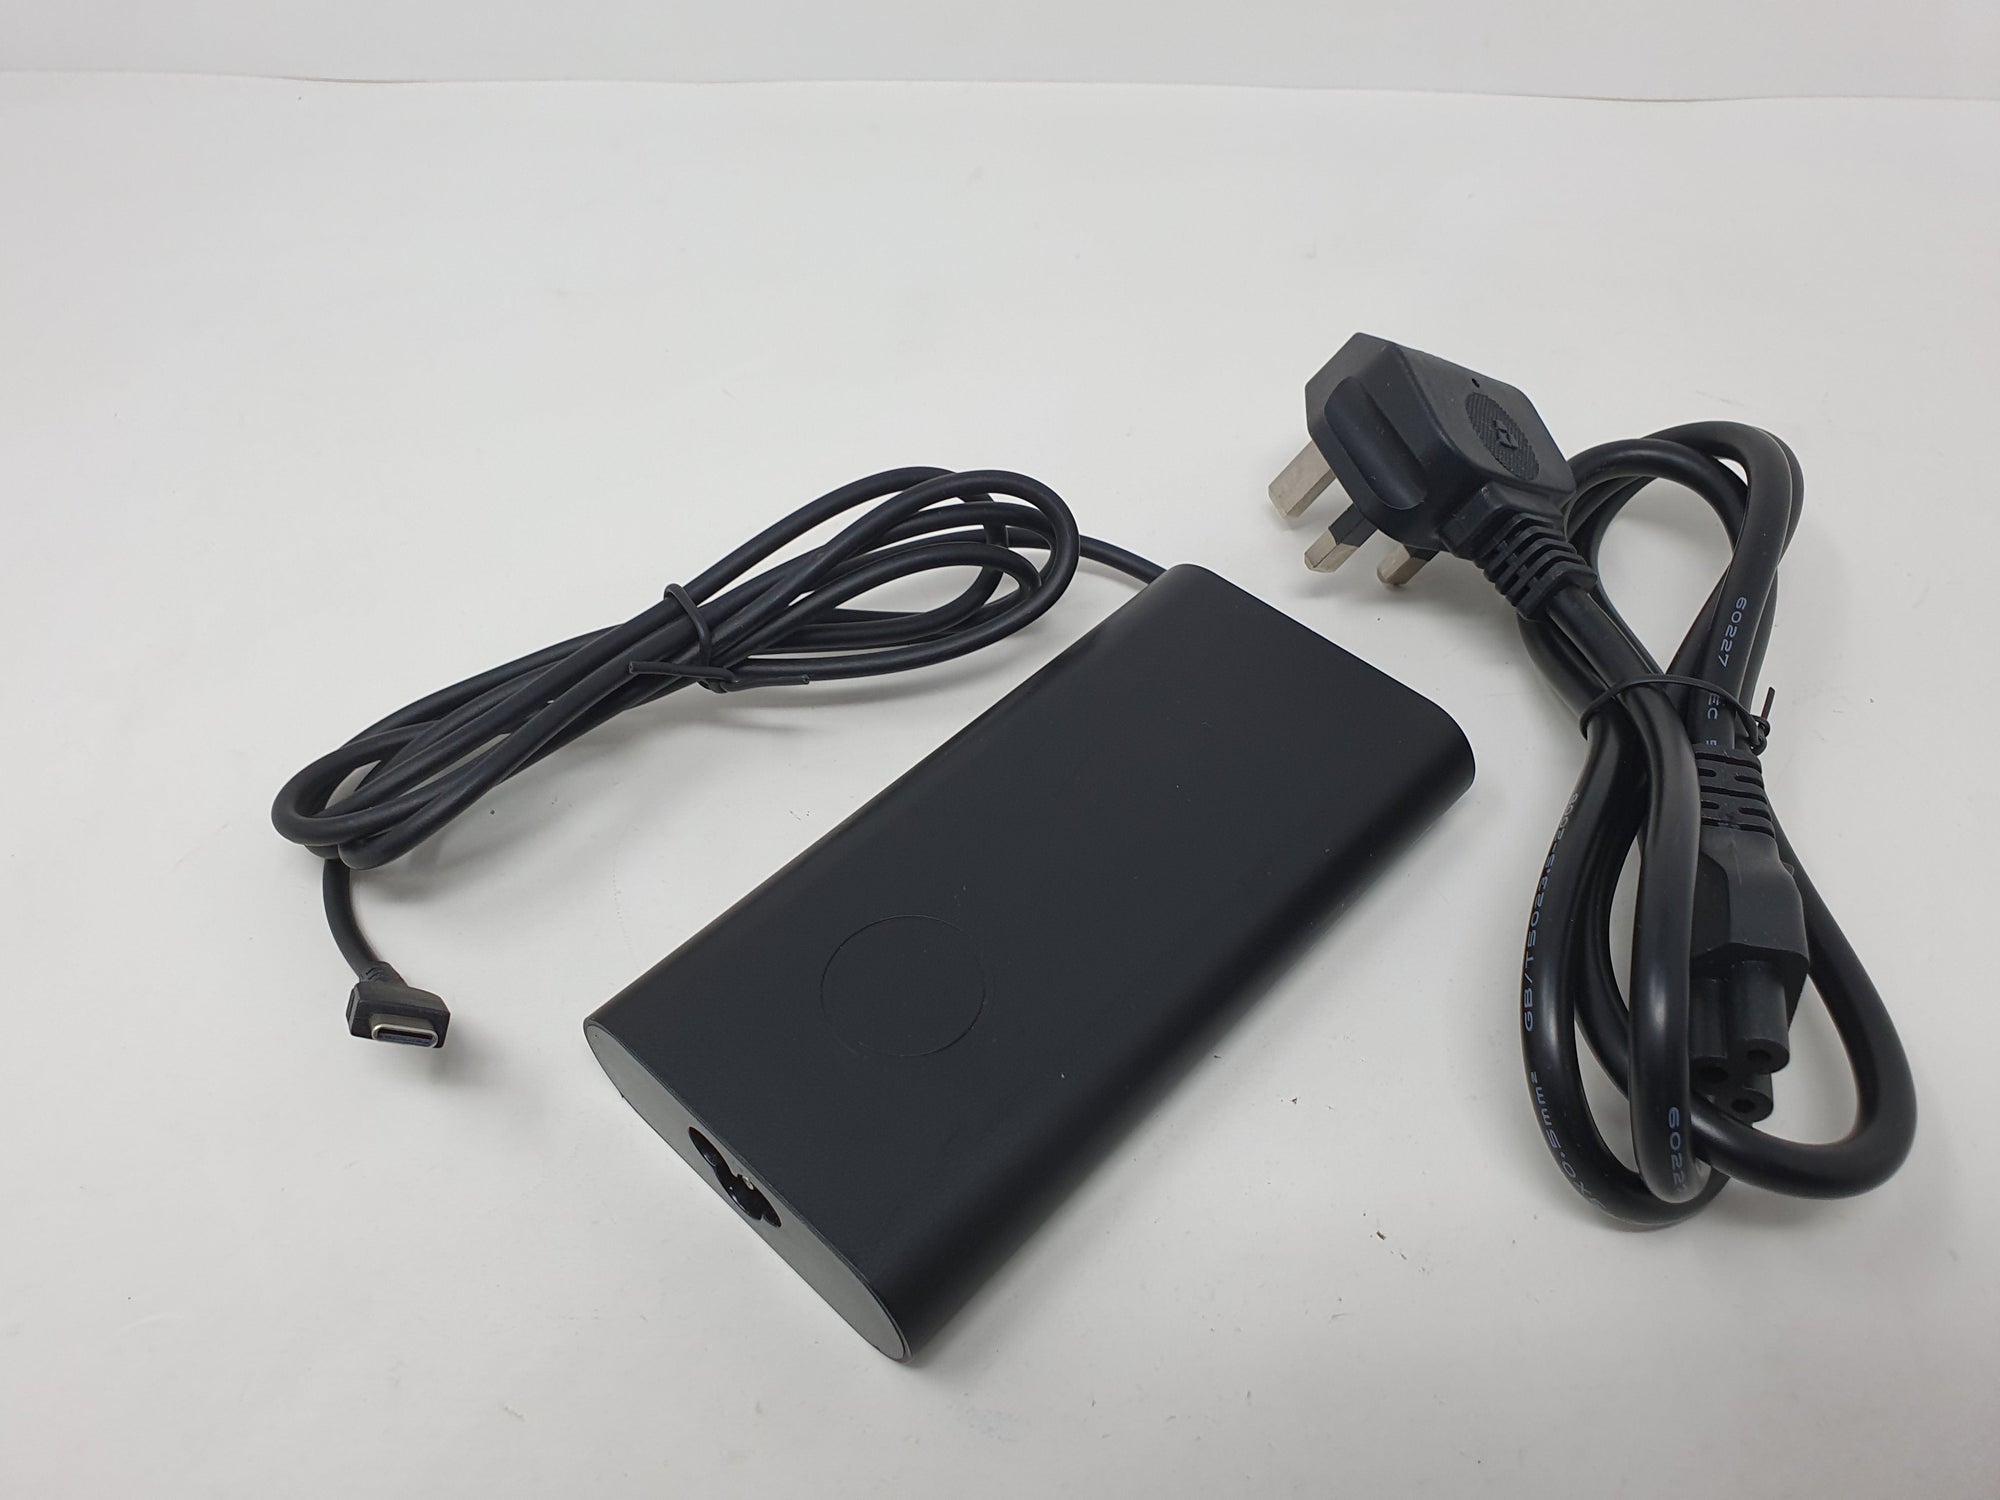 USB C Type-C Laptop Charger Power Supply Adapter for HP Laptop